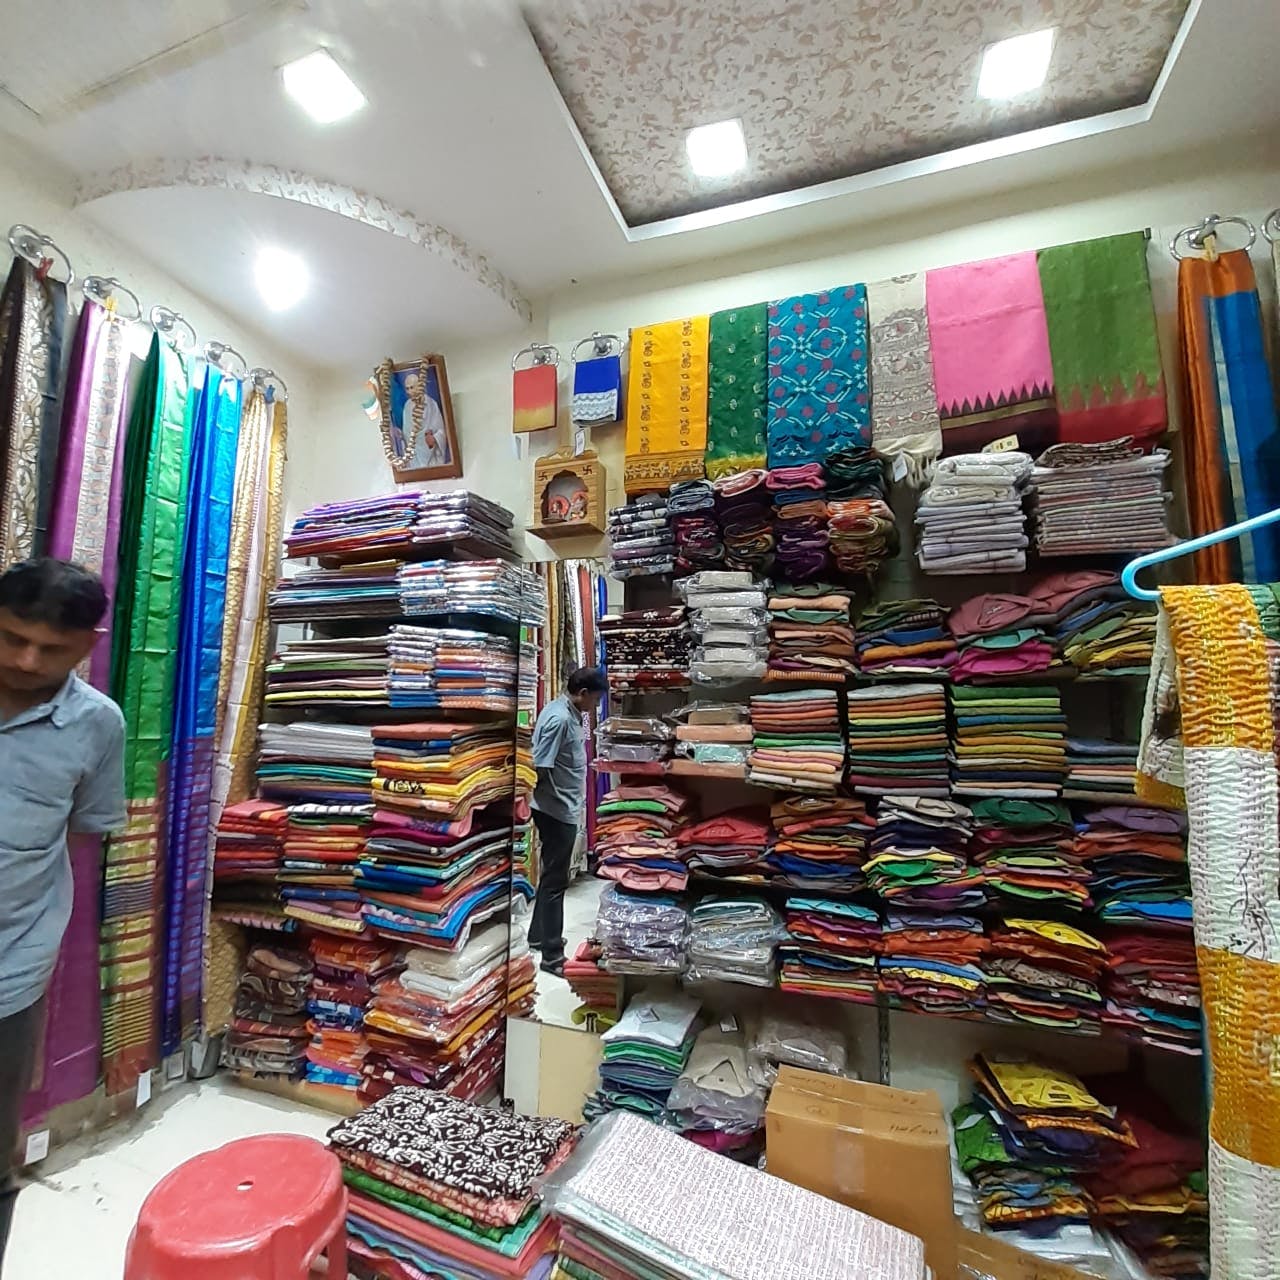 Outlet store,Textile,Retail,Building,Bazaar,Marketplace,Selling,Customer